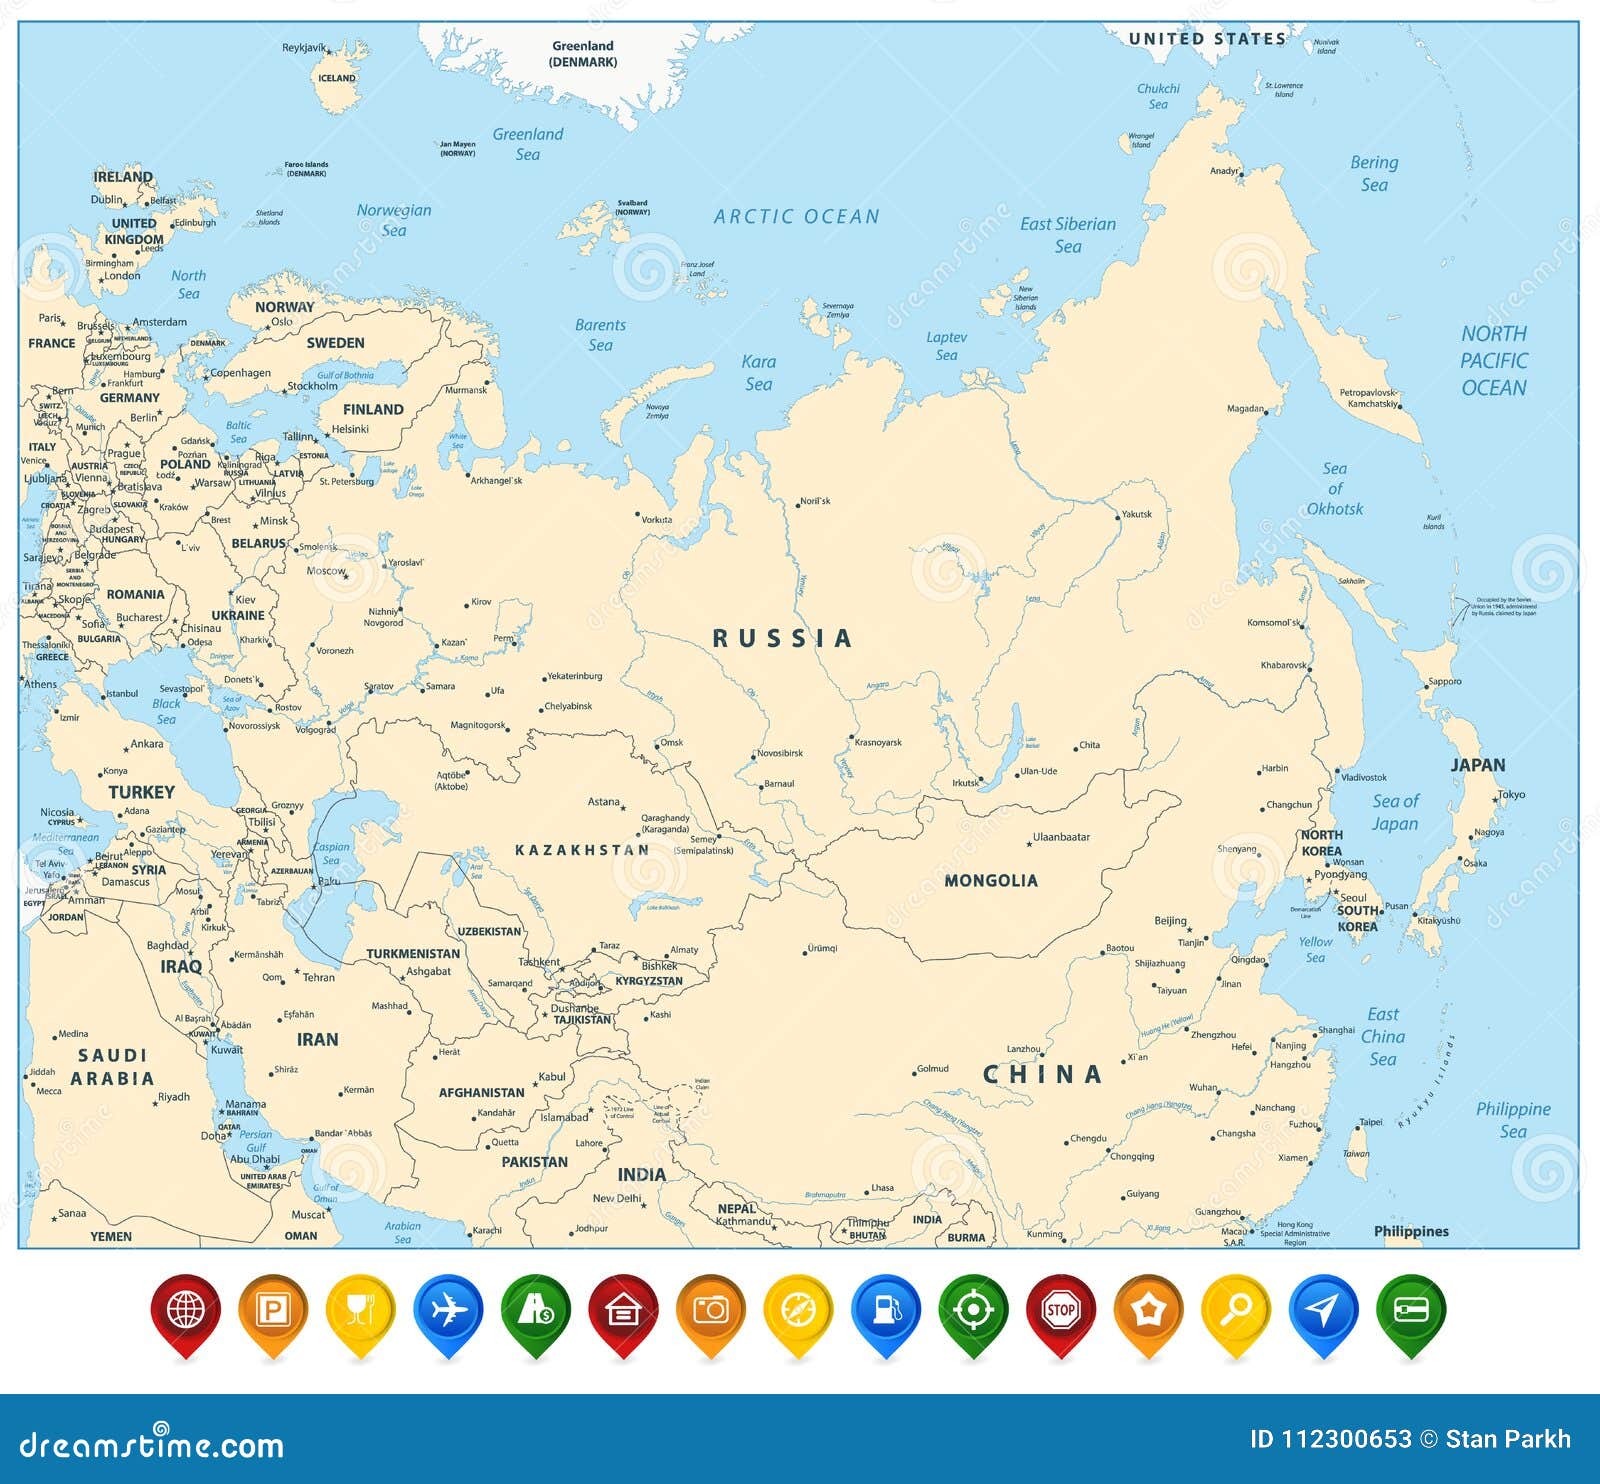 eurasia detailed map and colorful map pointers.